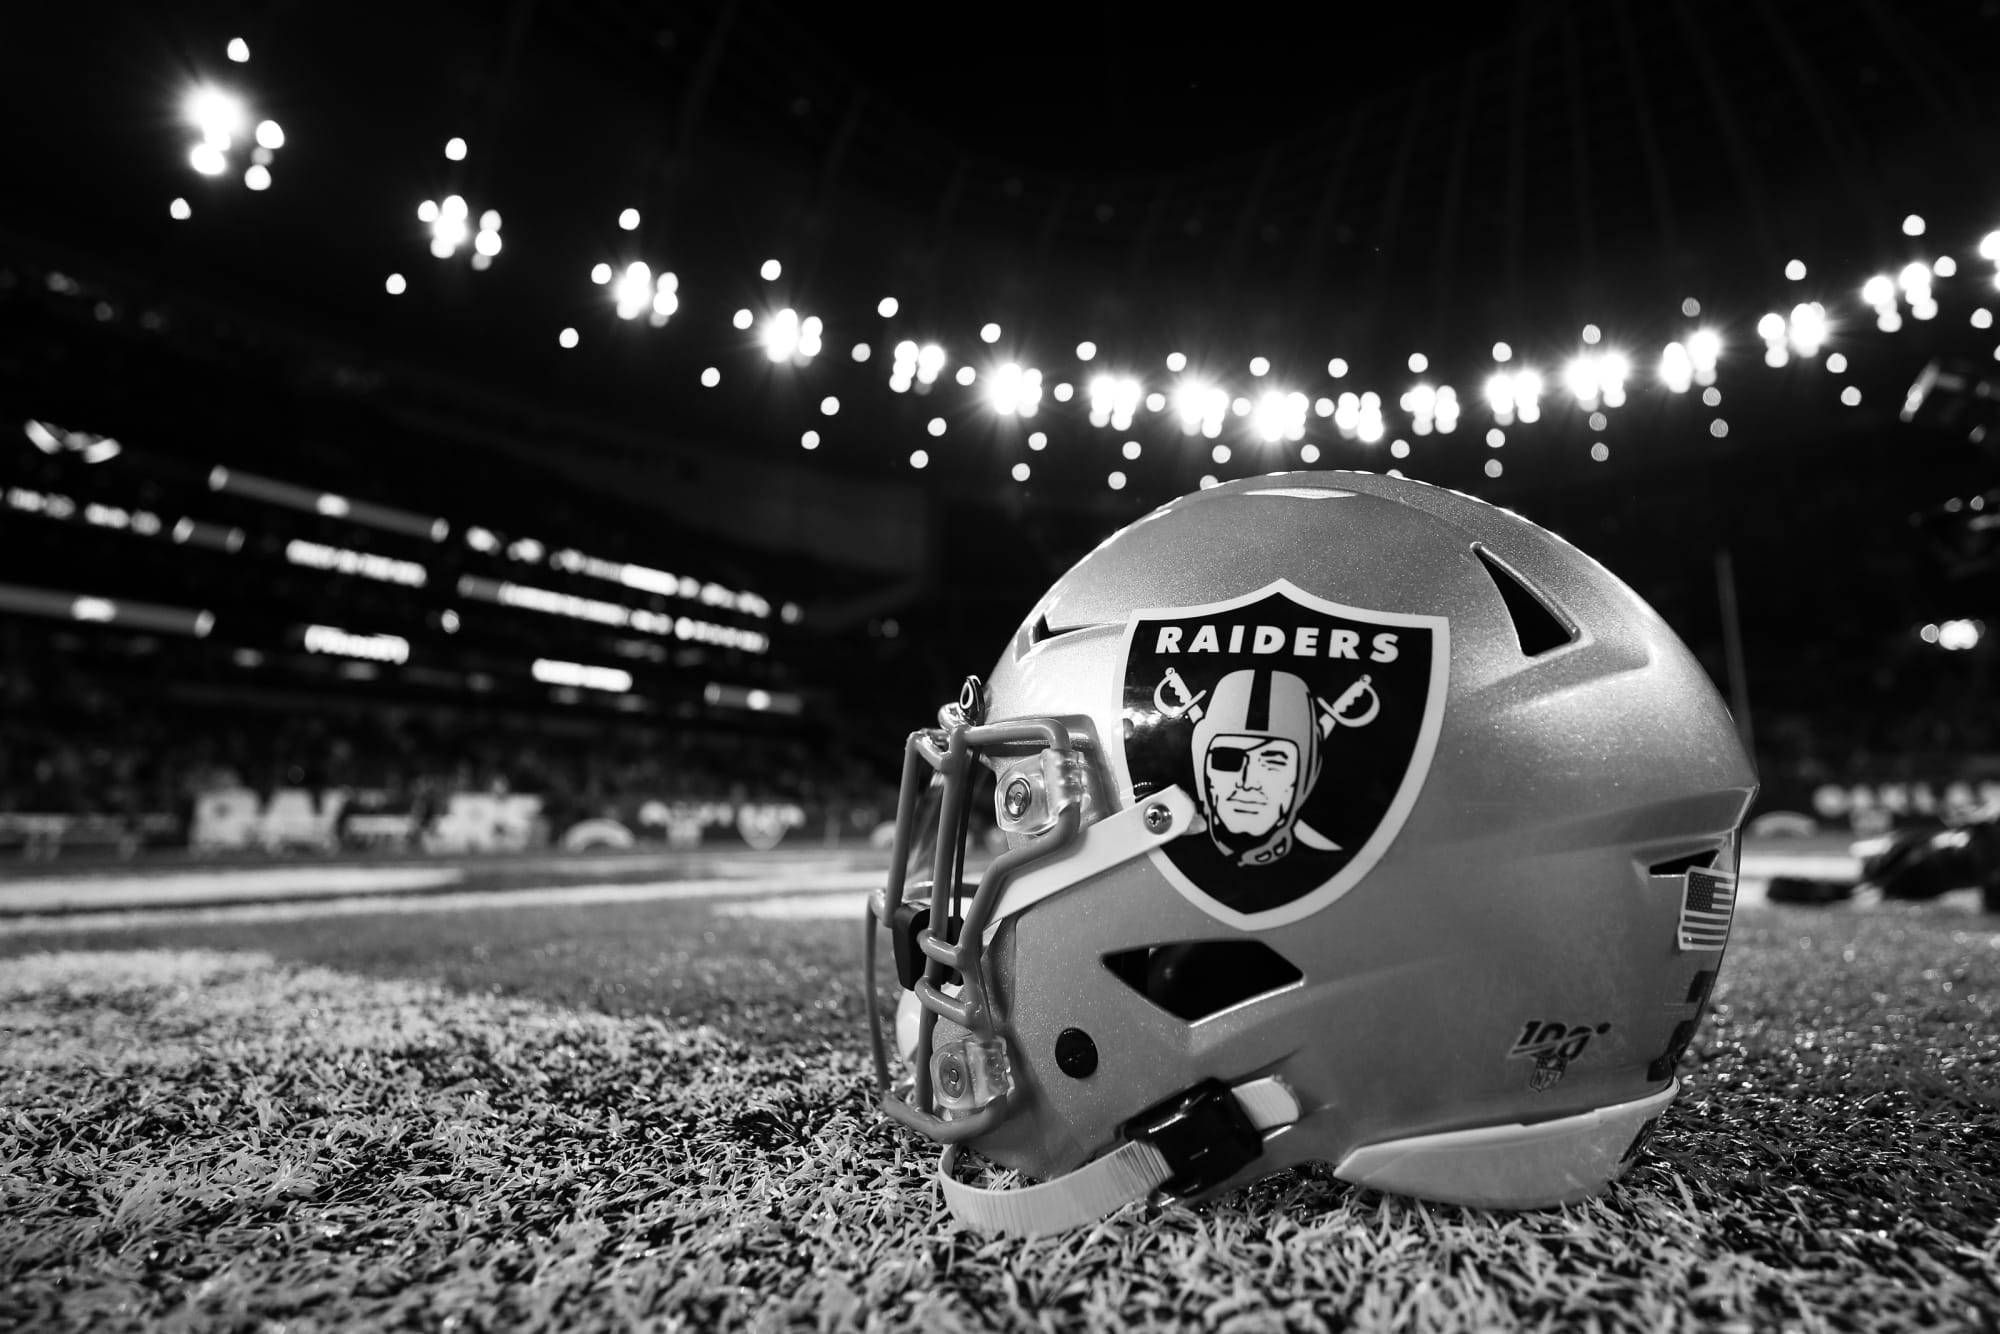 The History of the LV Raiders